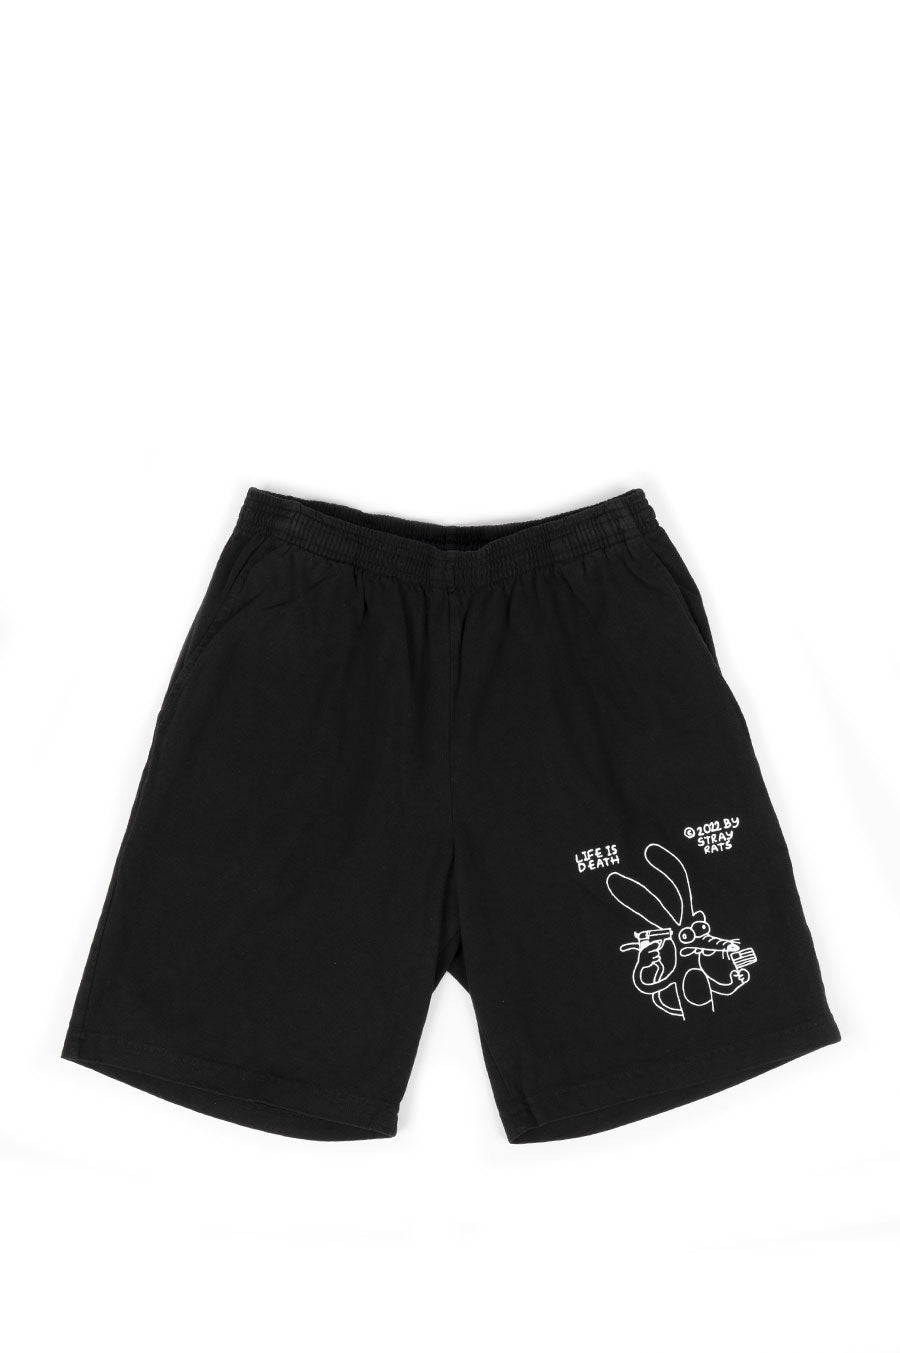 STRAY RATS LIFE IS DEATH JAMMER SHORT BLACK